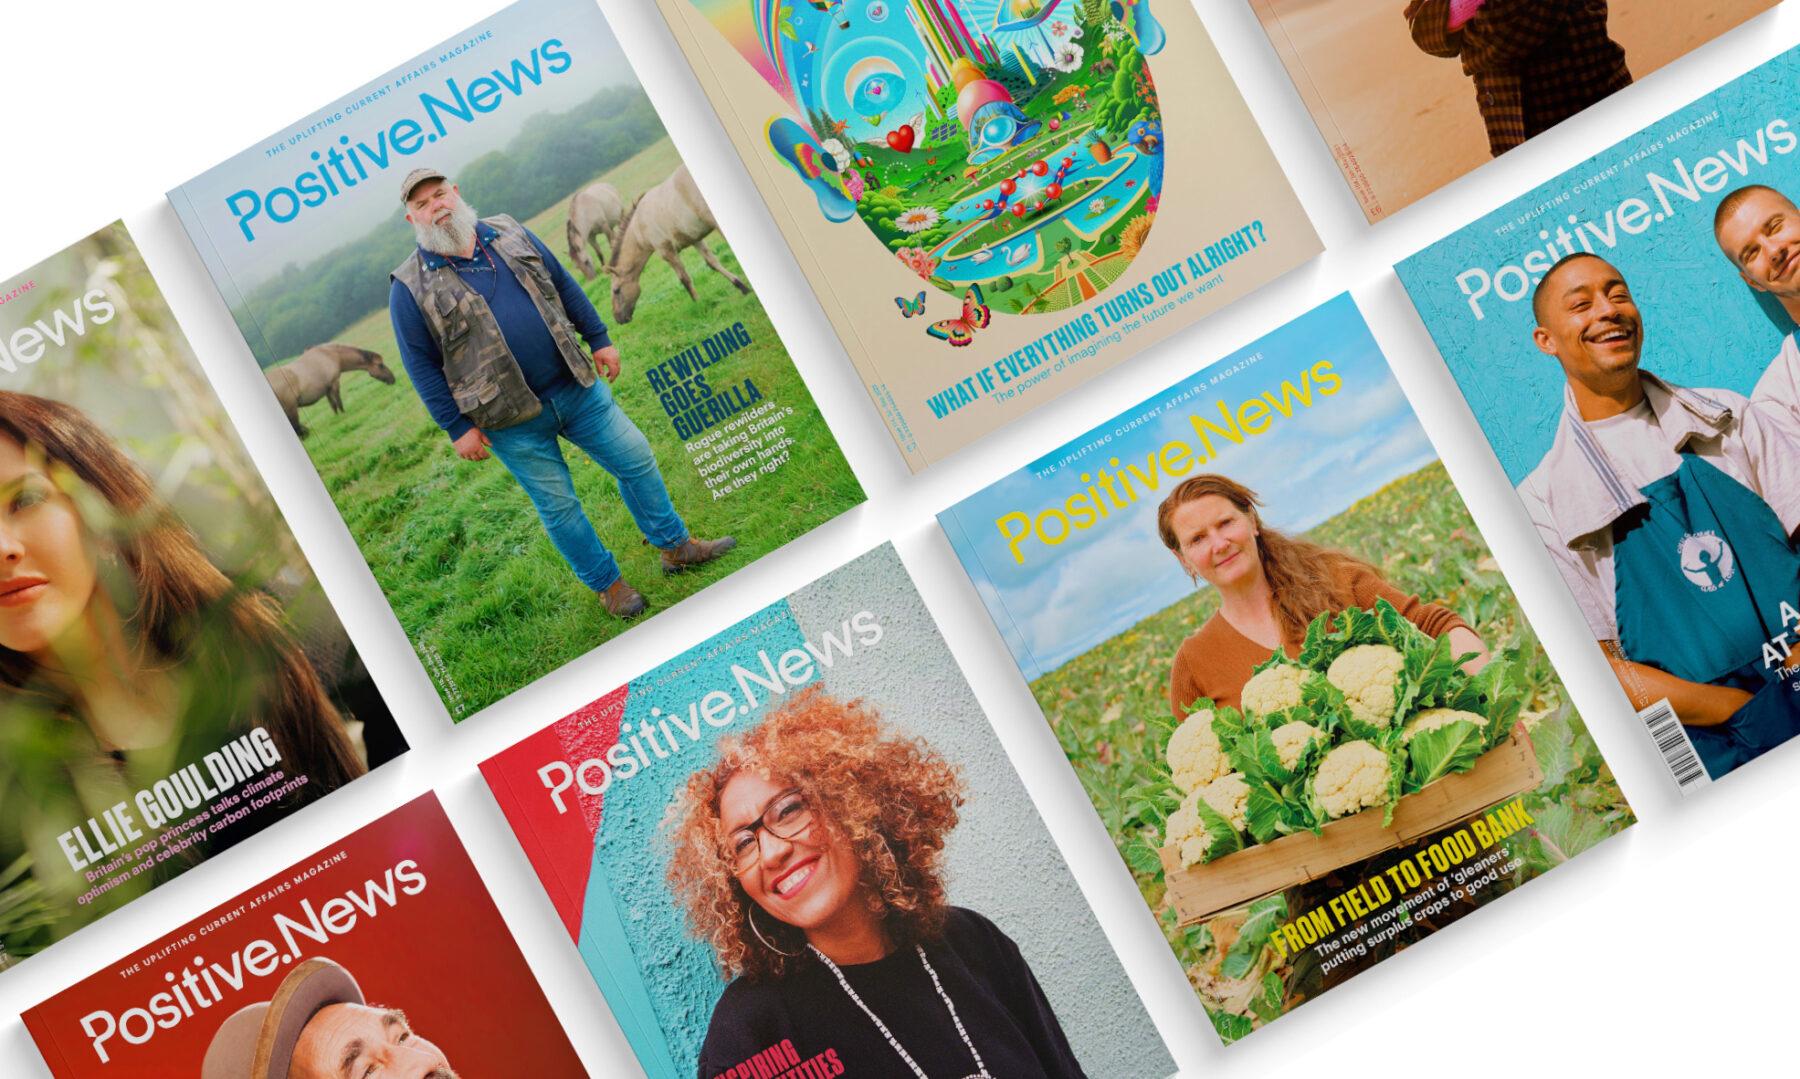 Image for 30 years of good news that matters: Positive News celebrates milestone year